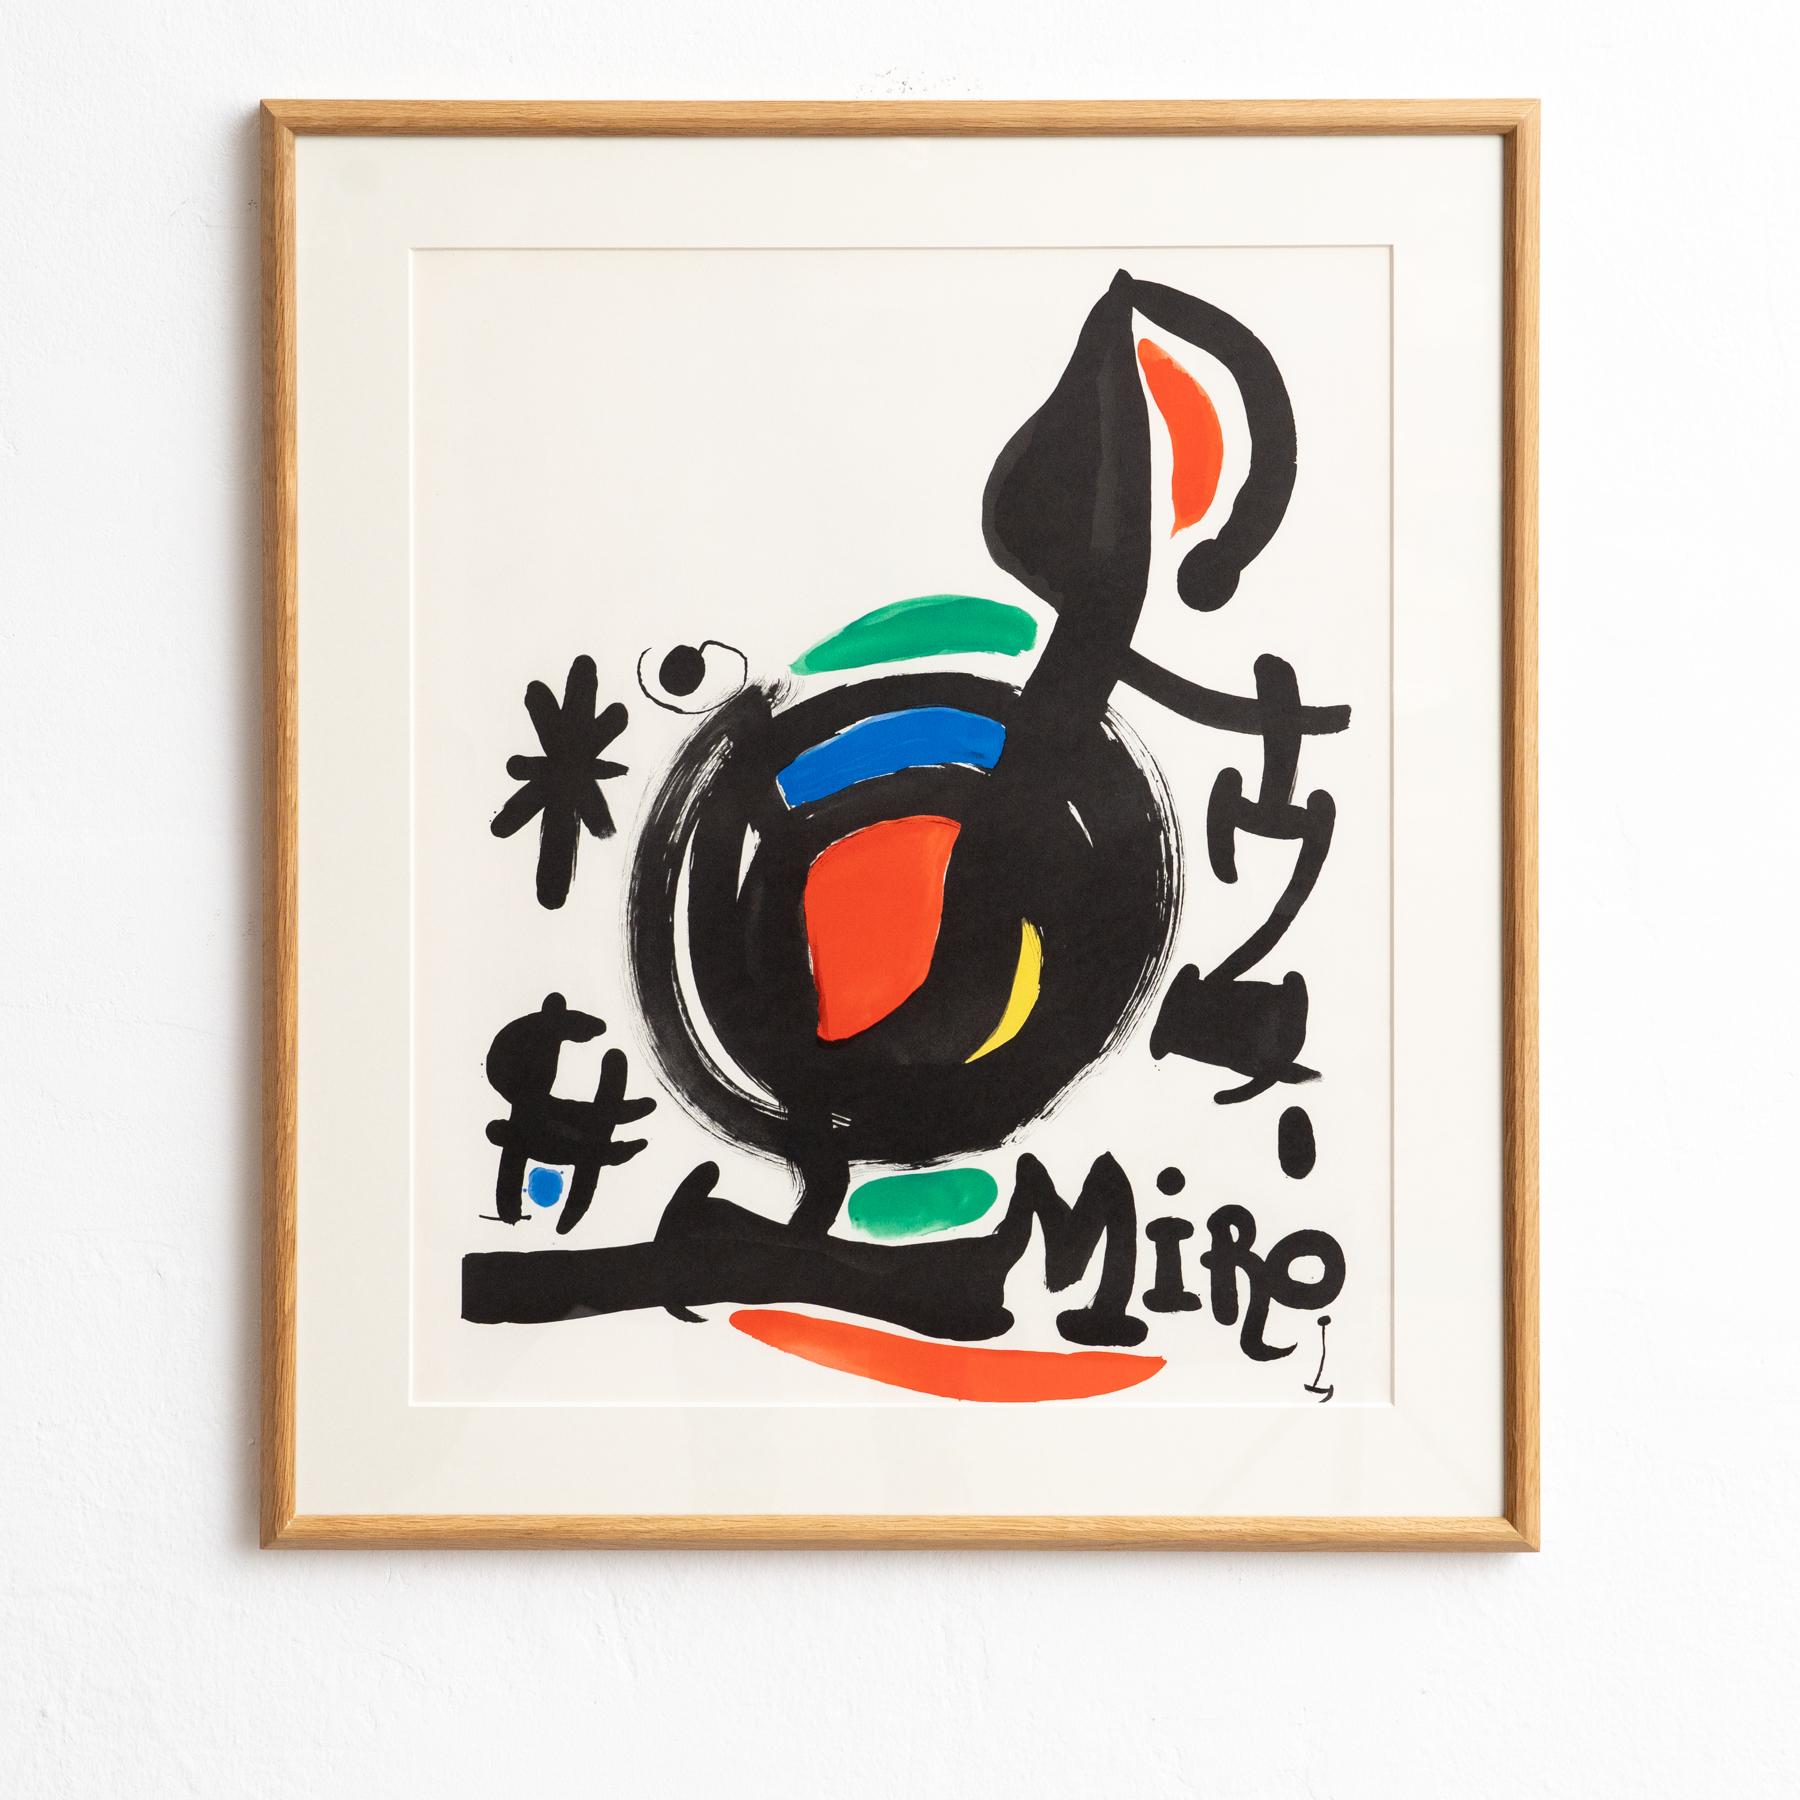 High Quality Fine Art Color Lithography by Joan Miró.

Manufactured in Spain, circa 1969.

In original condition with minor wear consistent of age and use, preserving a beautiful patina.

Signed on the stone

Materials: 
Paper 

Important